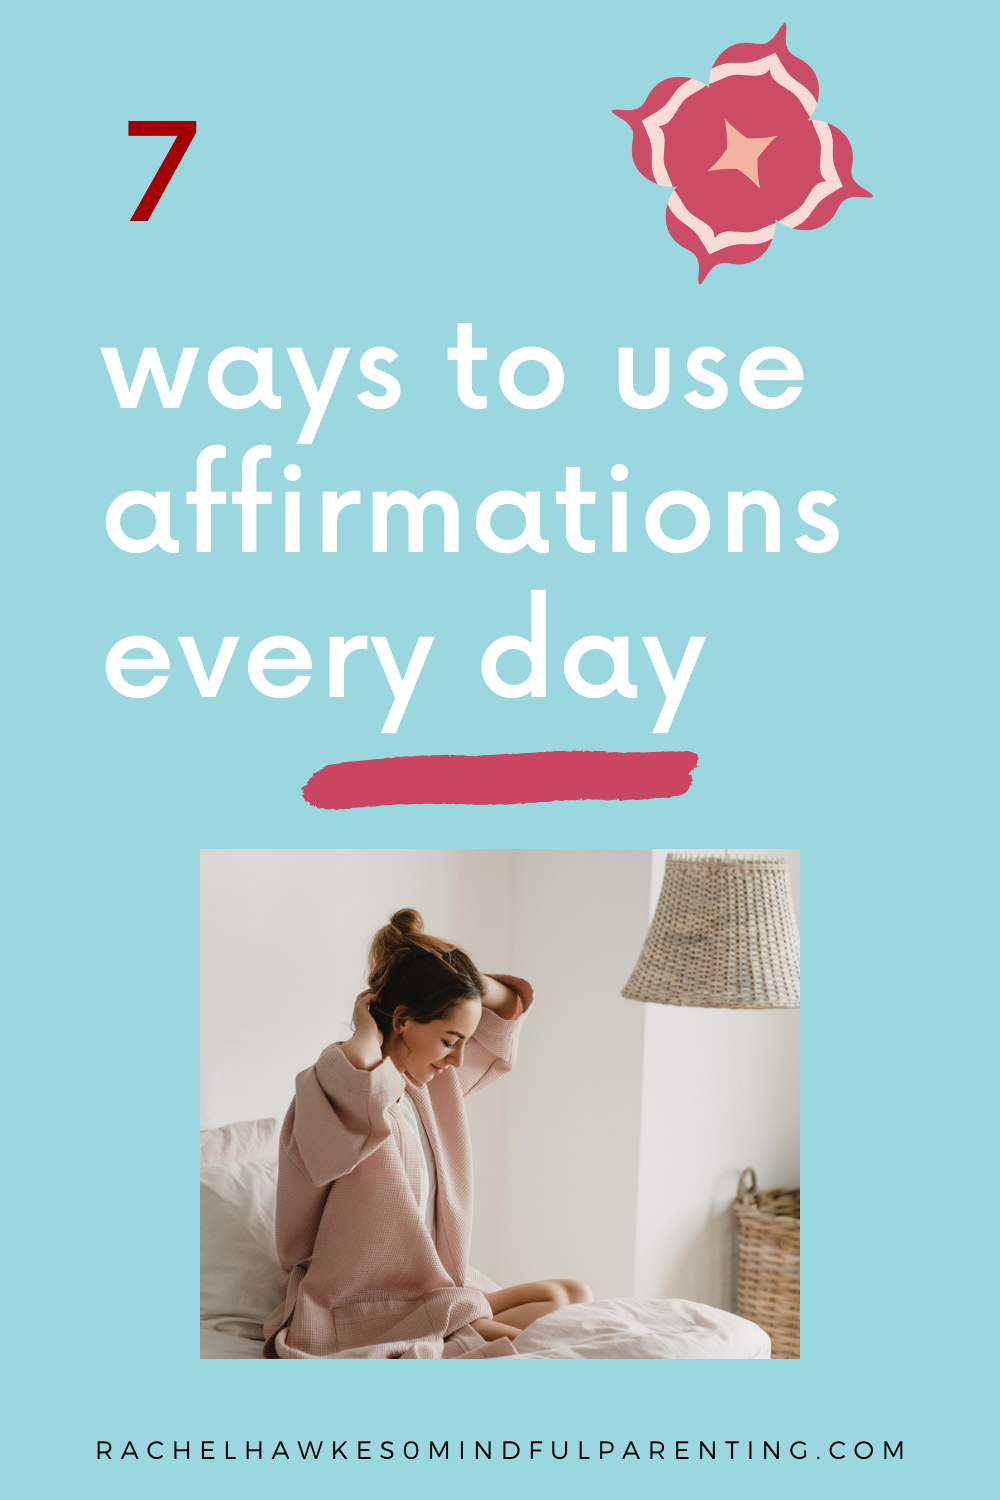 7 WAYS TO USE AFFIRMATIONS